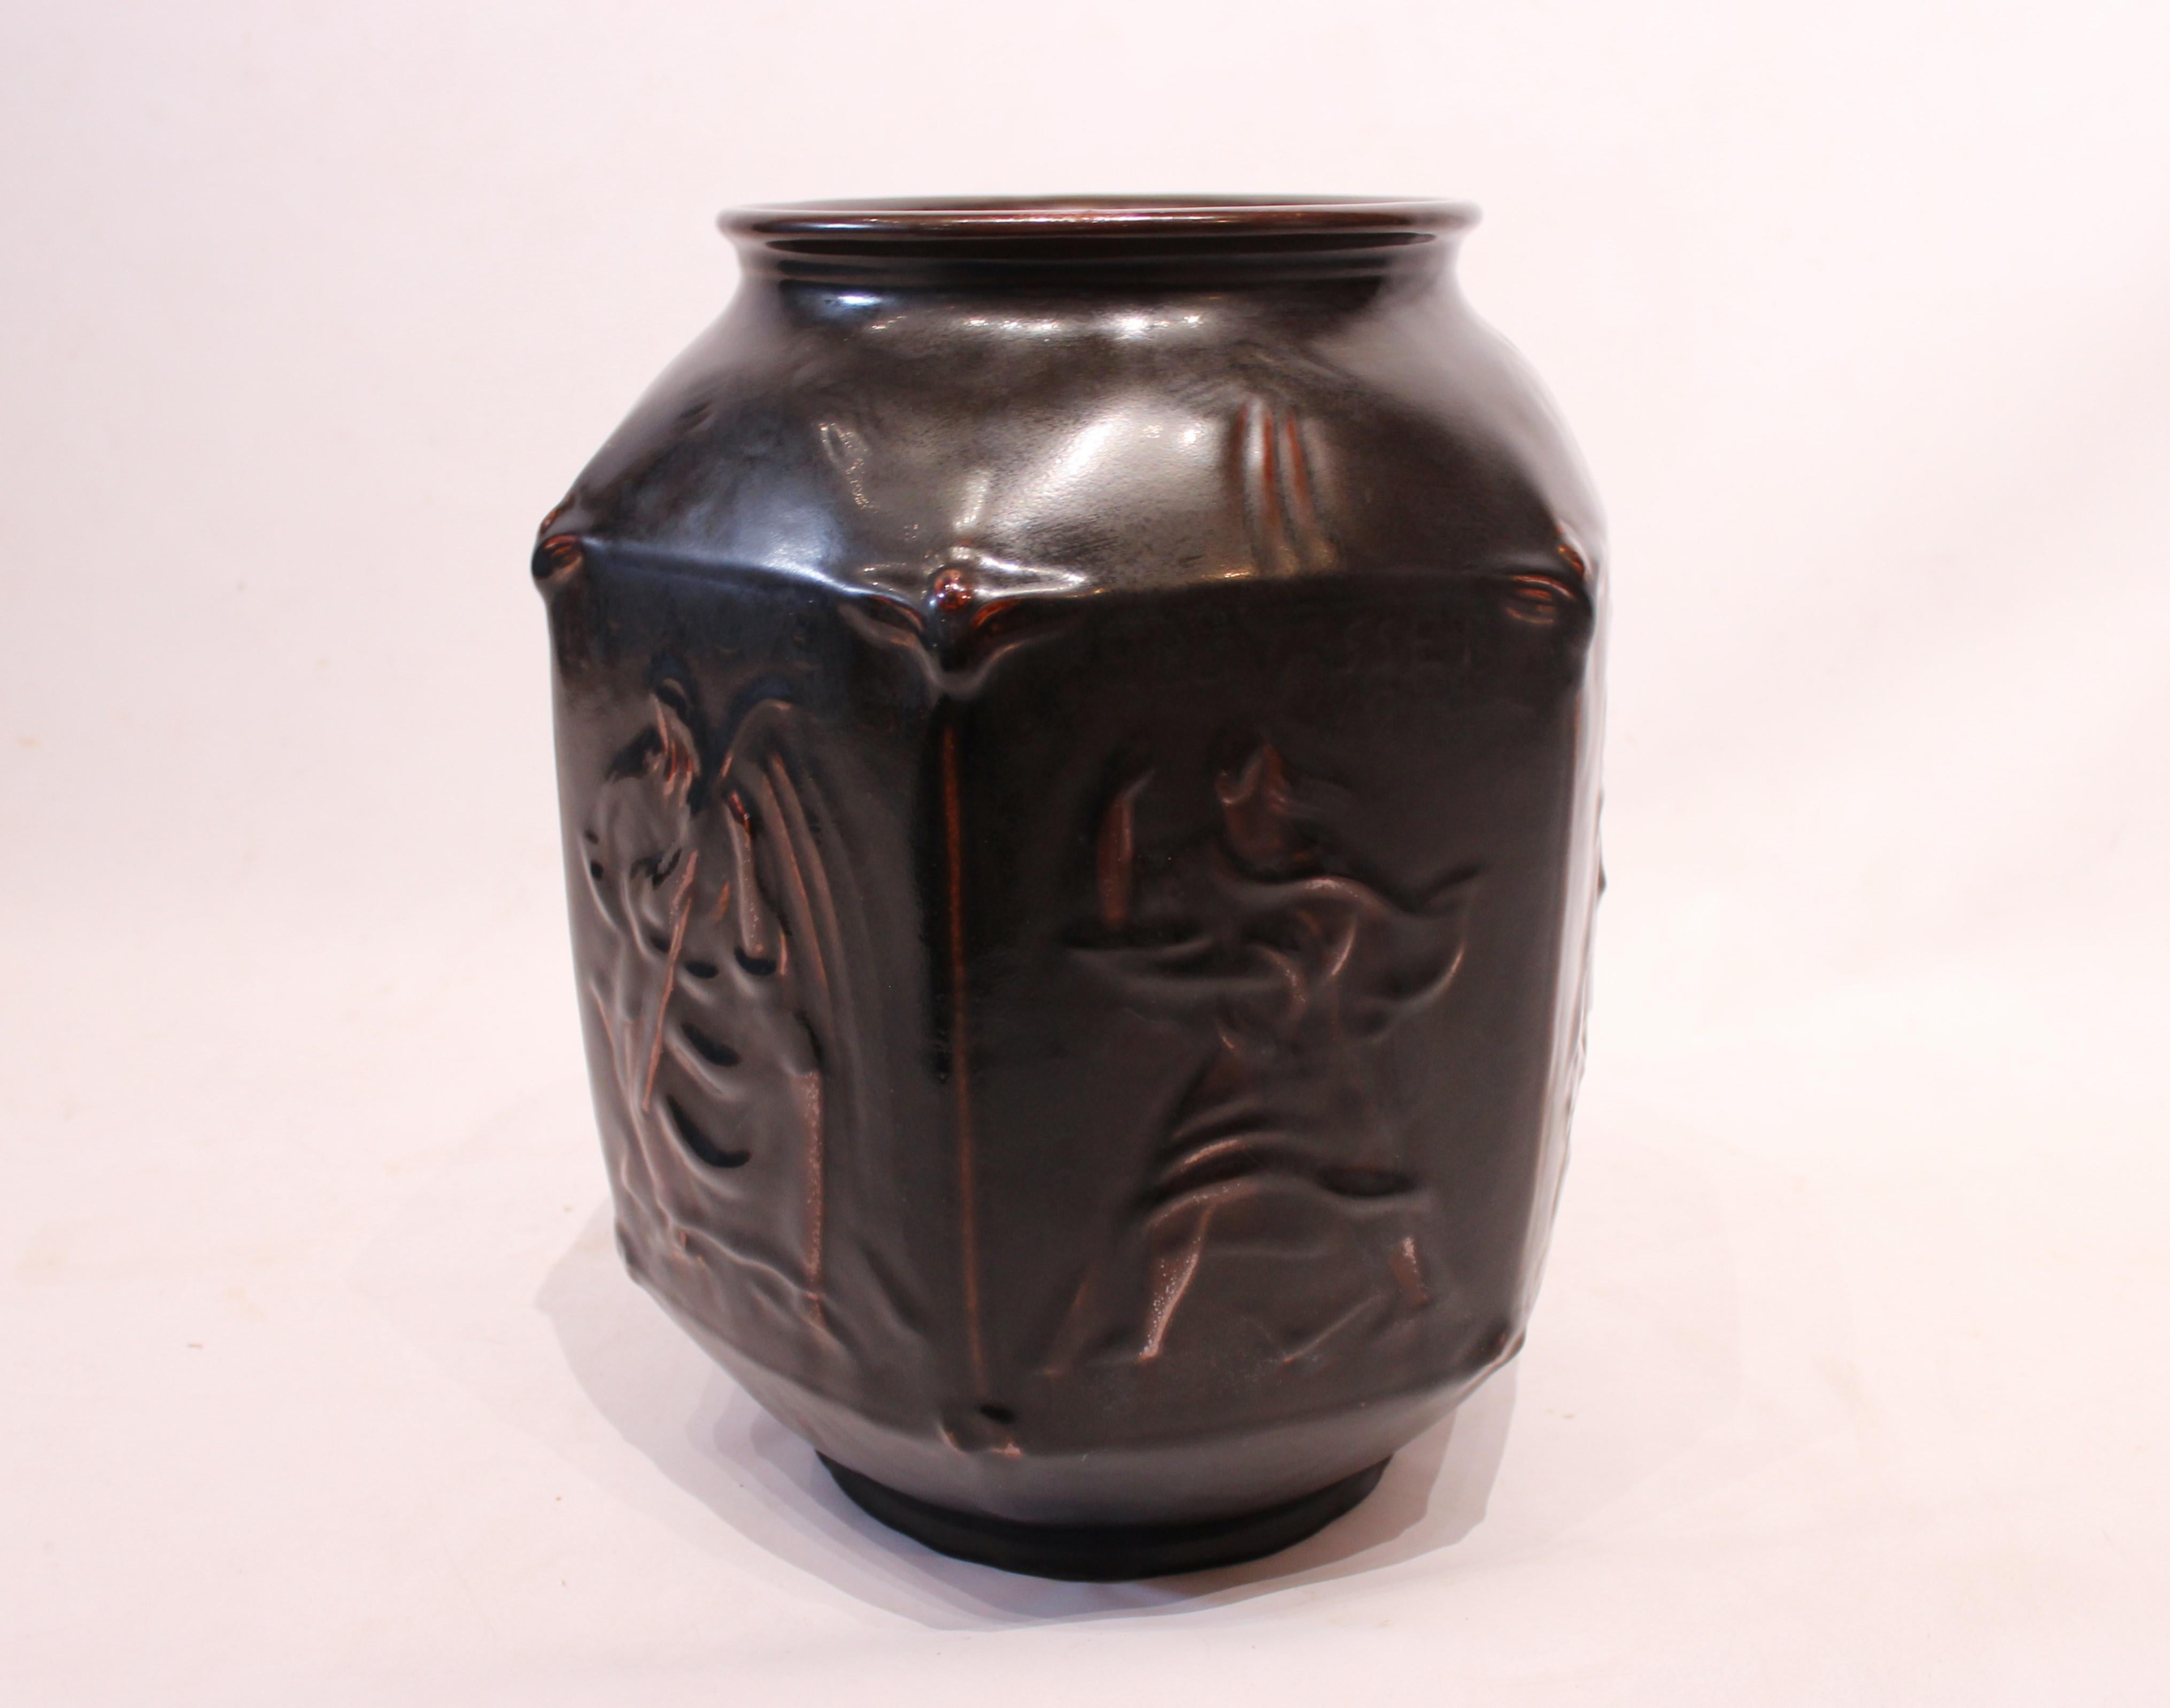 Royal Copenhagen stoneware floor vase with a dark glaze decorated with motifs signed by Jais Nielsen, 1885-1961, and numbered 2222. The vase is in great vintage condition from circa 1940s and works perfectly as a decorative piece in any home.